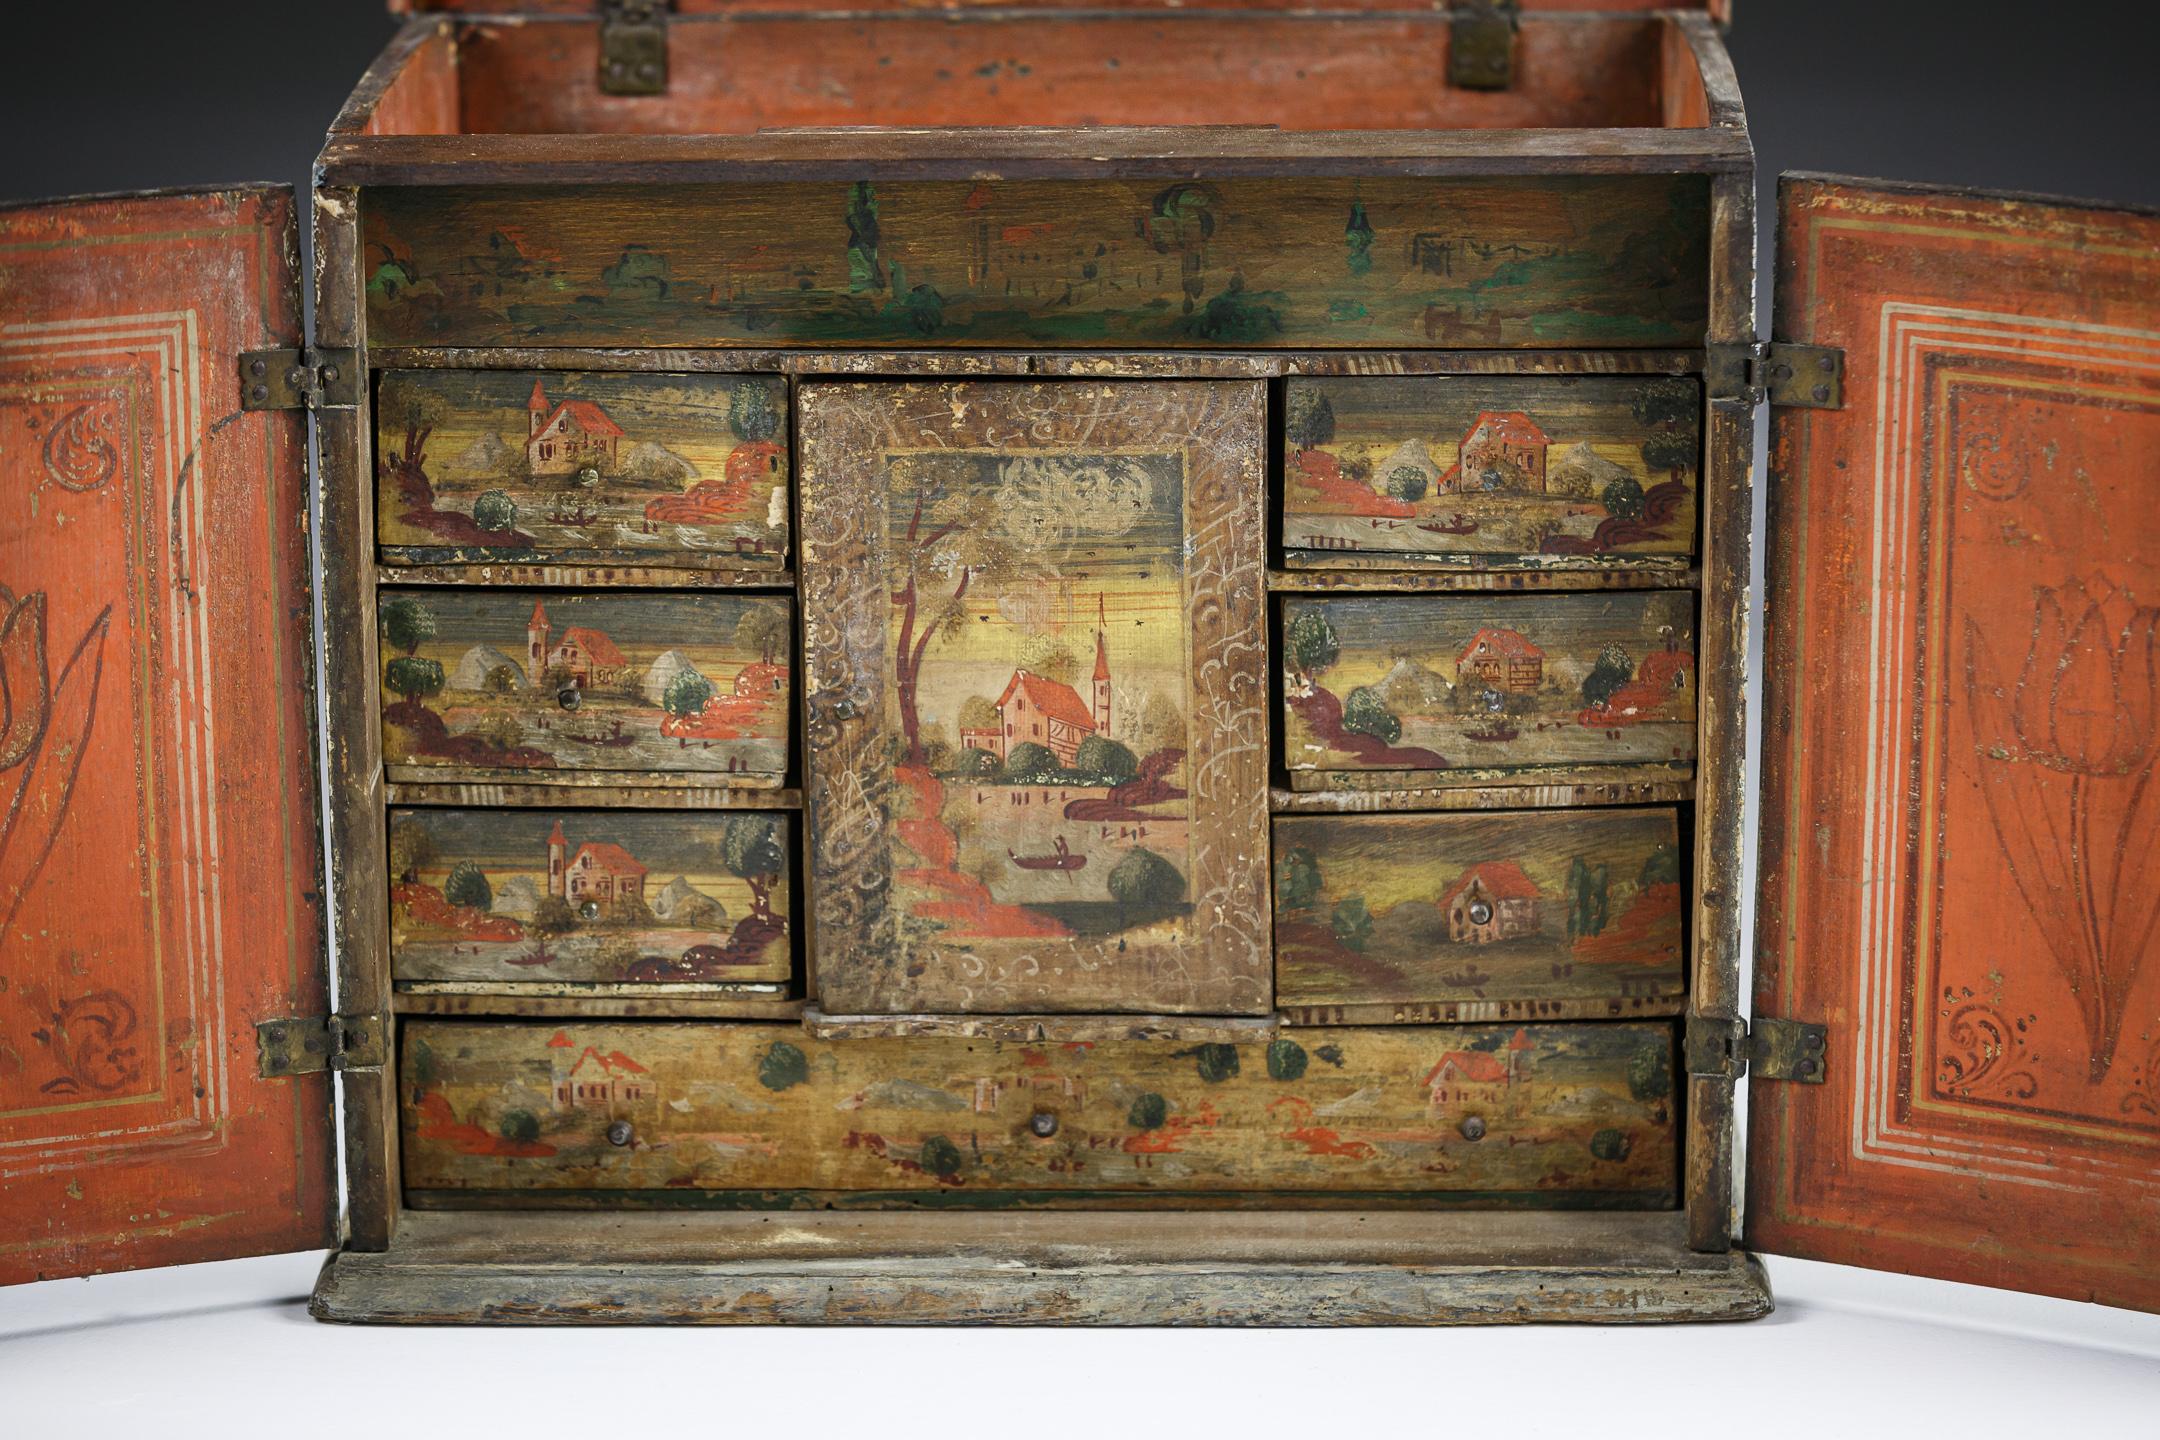 Extraordinary Early 18th Century Necessaire Secrets In Fair Condition For Sale In Pease pottage, West Sussex